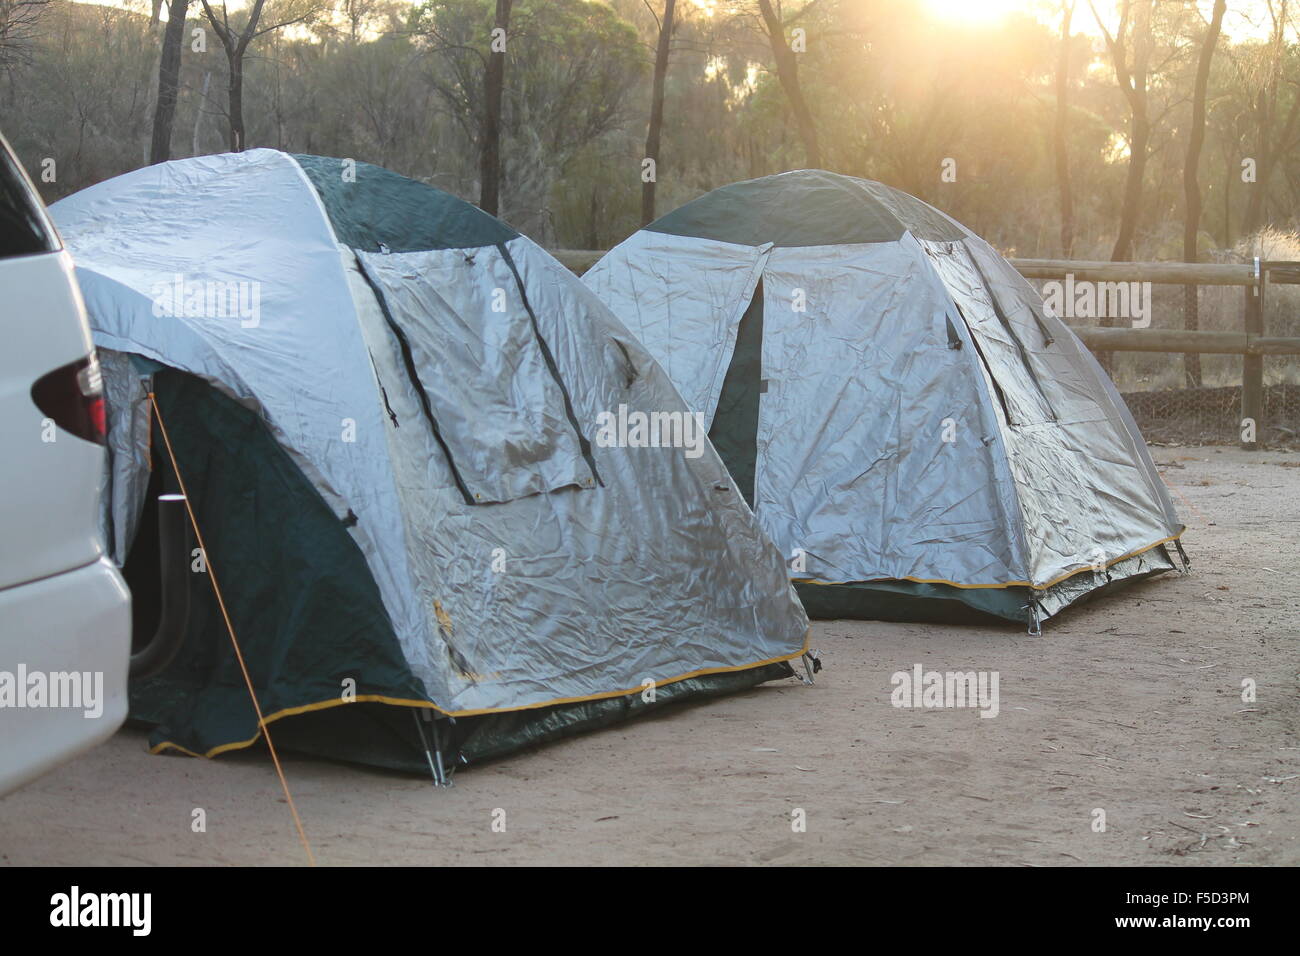 Two three man tents pitched at Wave Rock Camp Ground in Hyden, Western Australia while the sun is setting in the background. Stock Photo